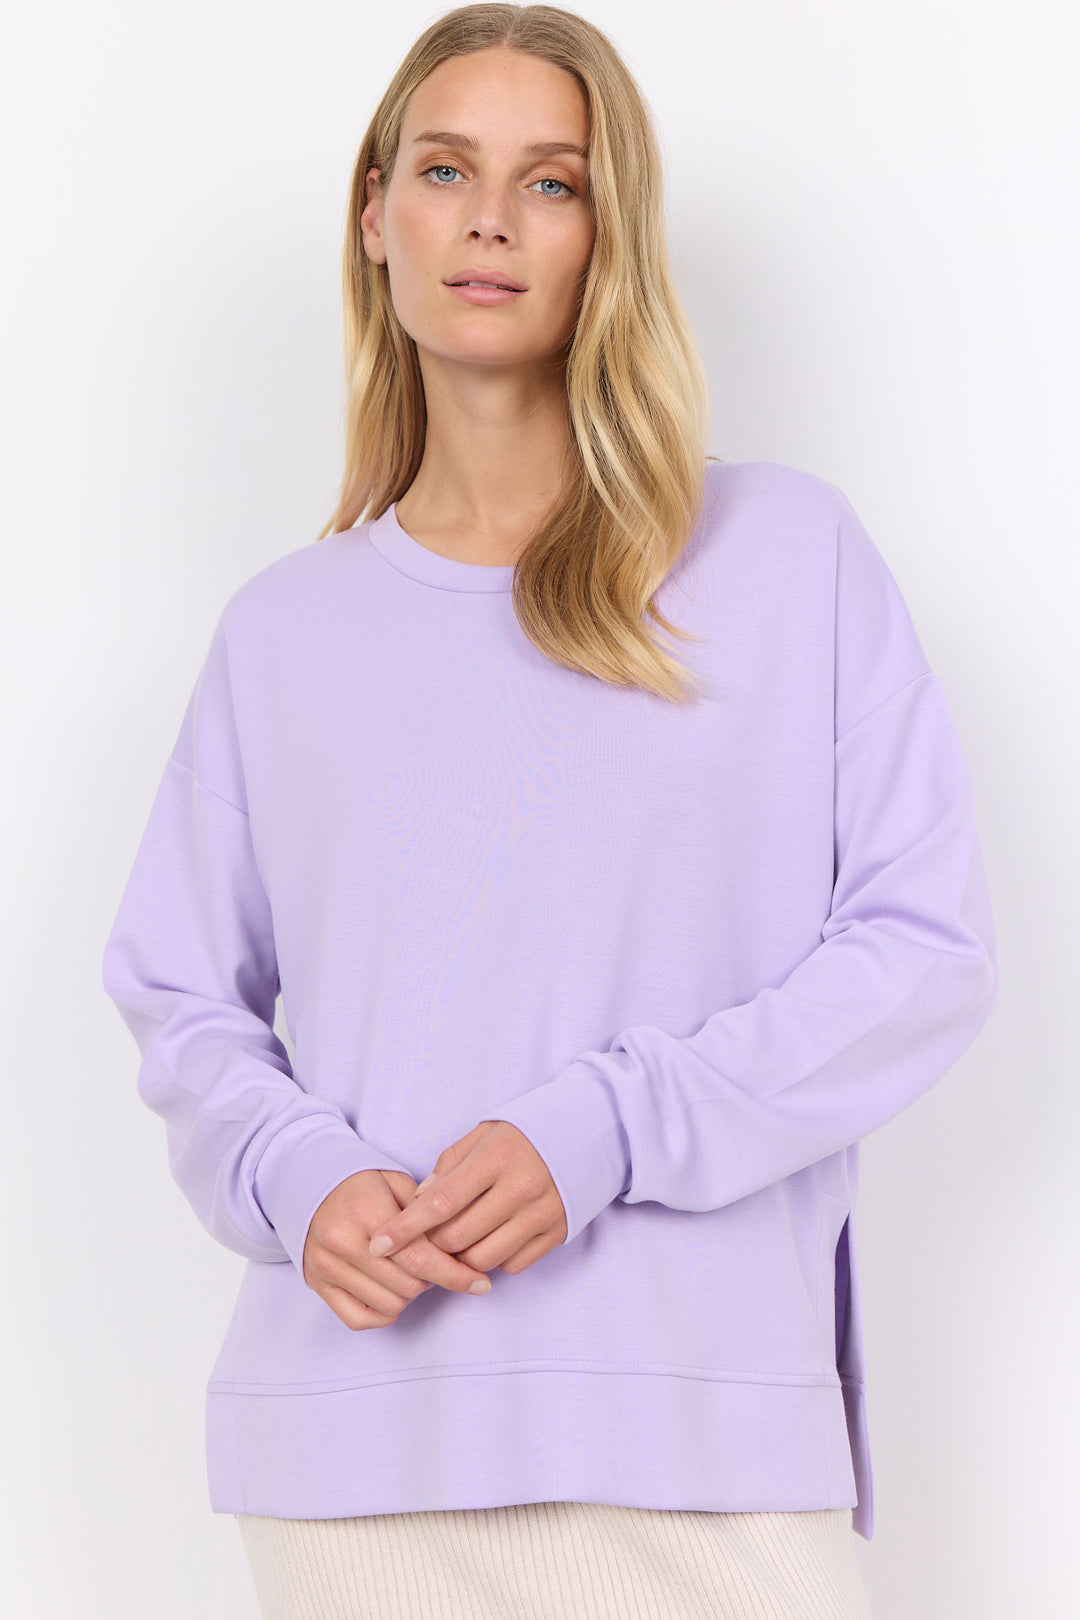 This Long Sleeve Sweater Top offers a simple and classy look with a looser fit and round neck. 